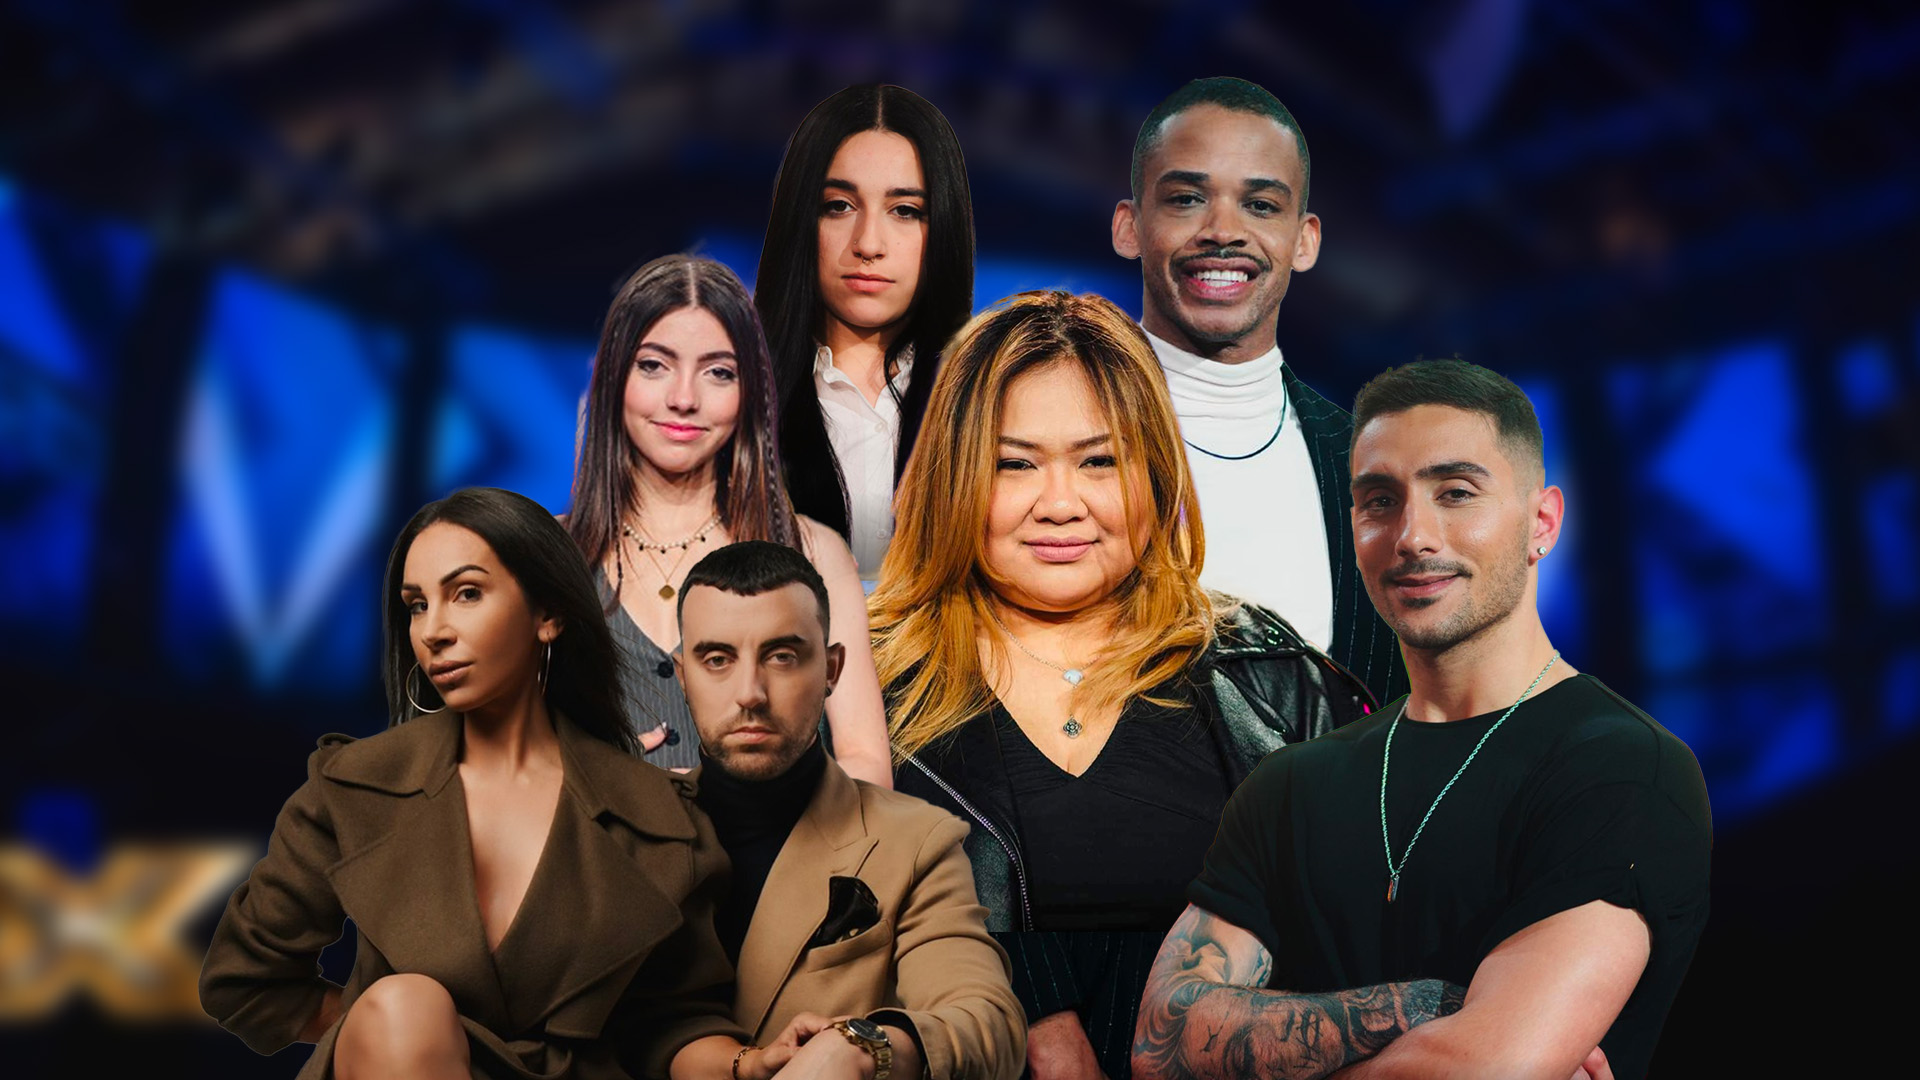 Six Acts Advance to Next Phase of X Factor Malta